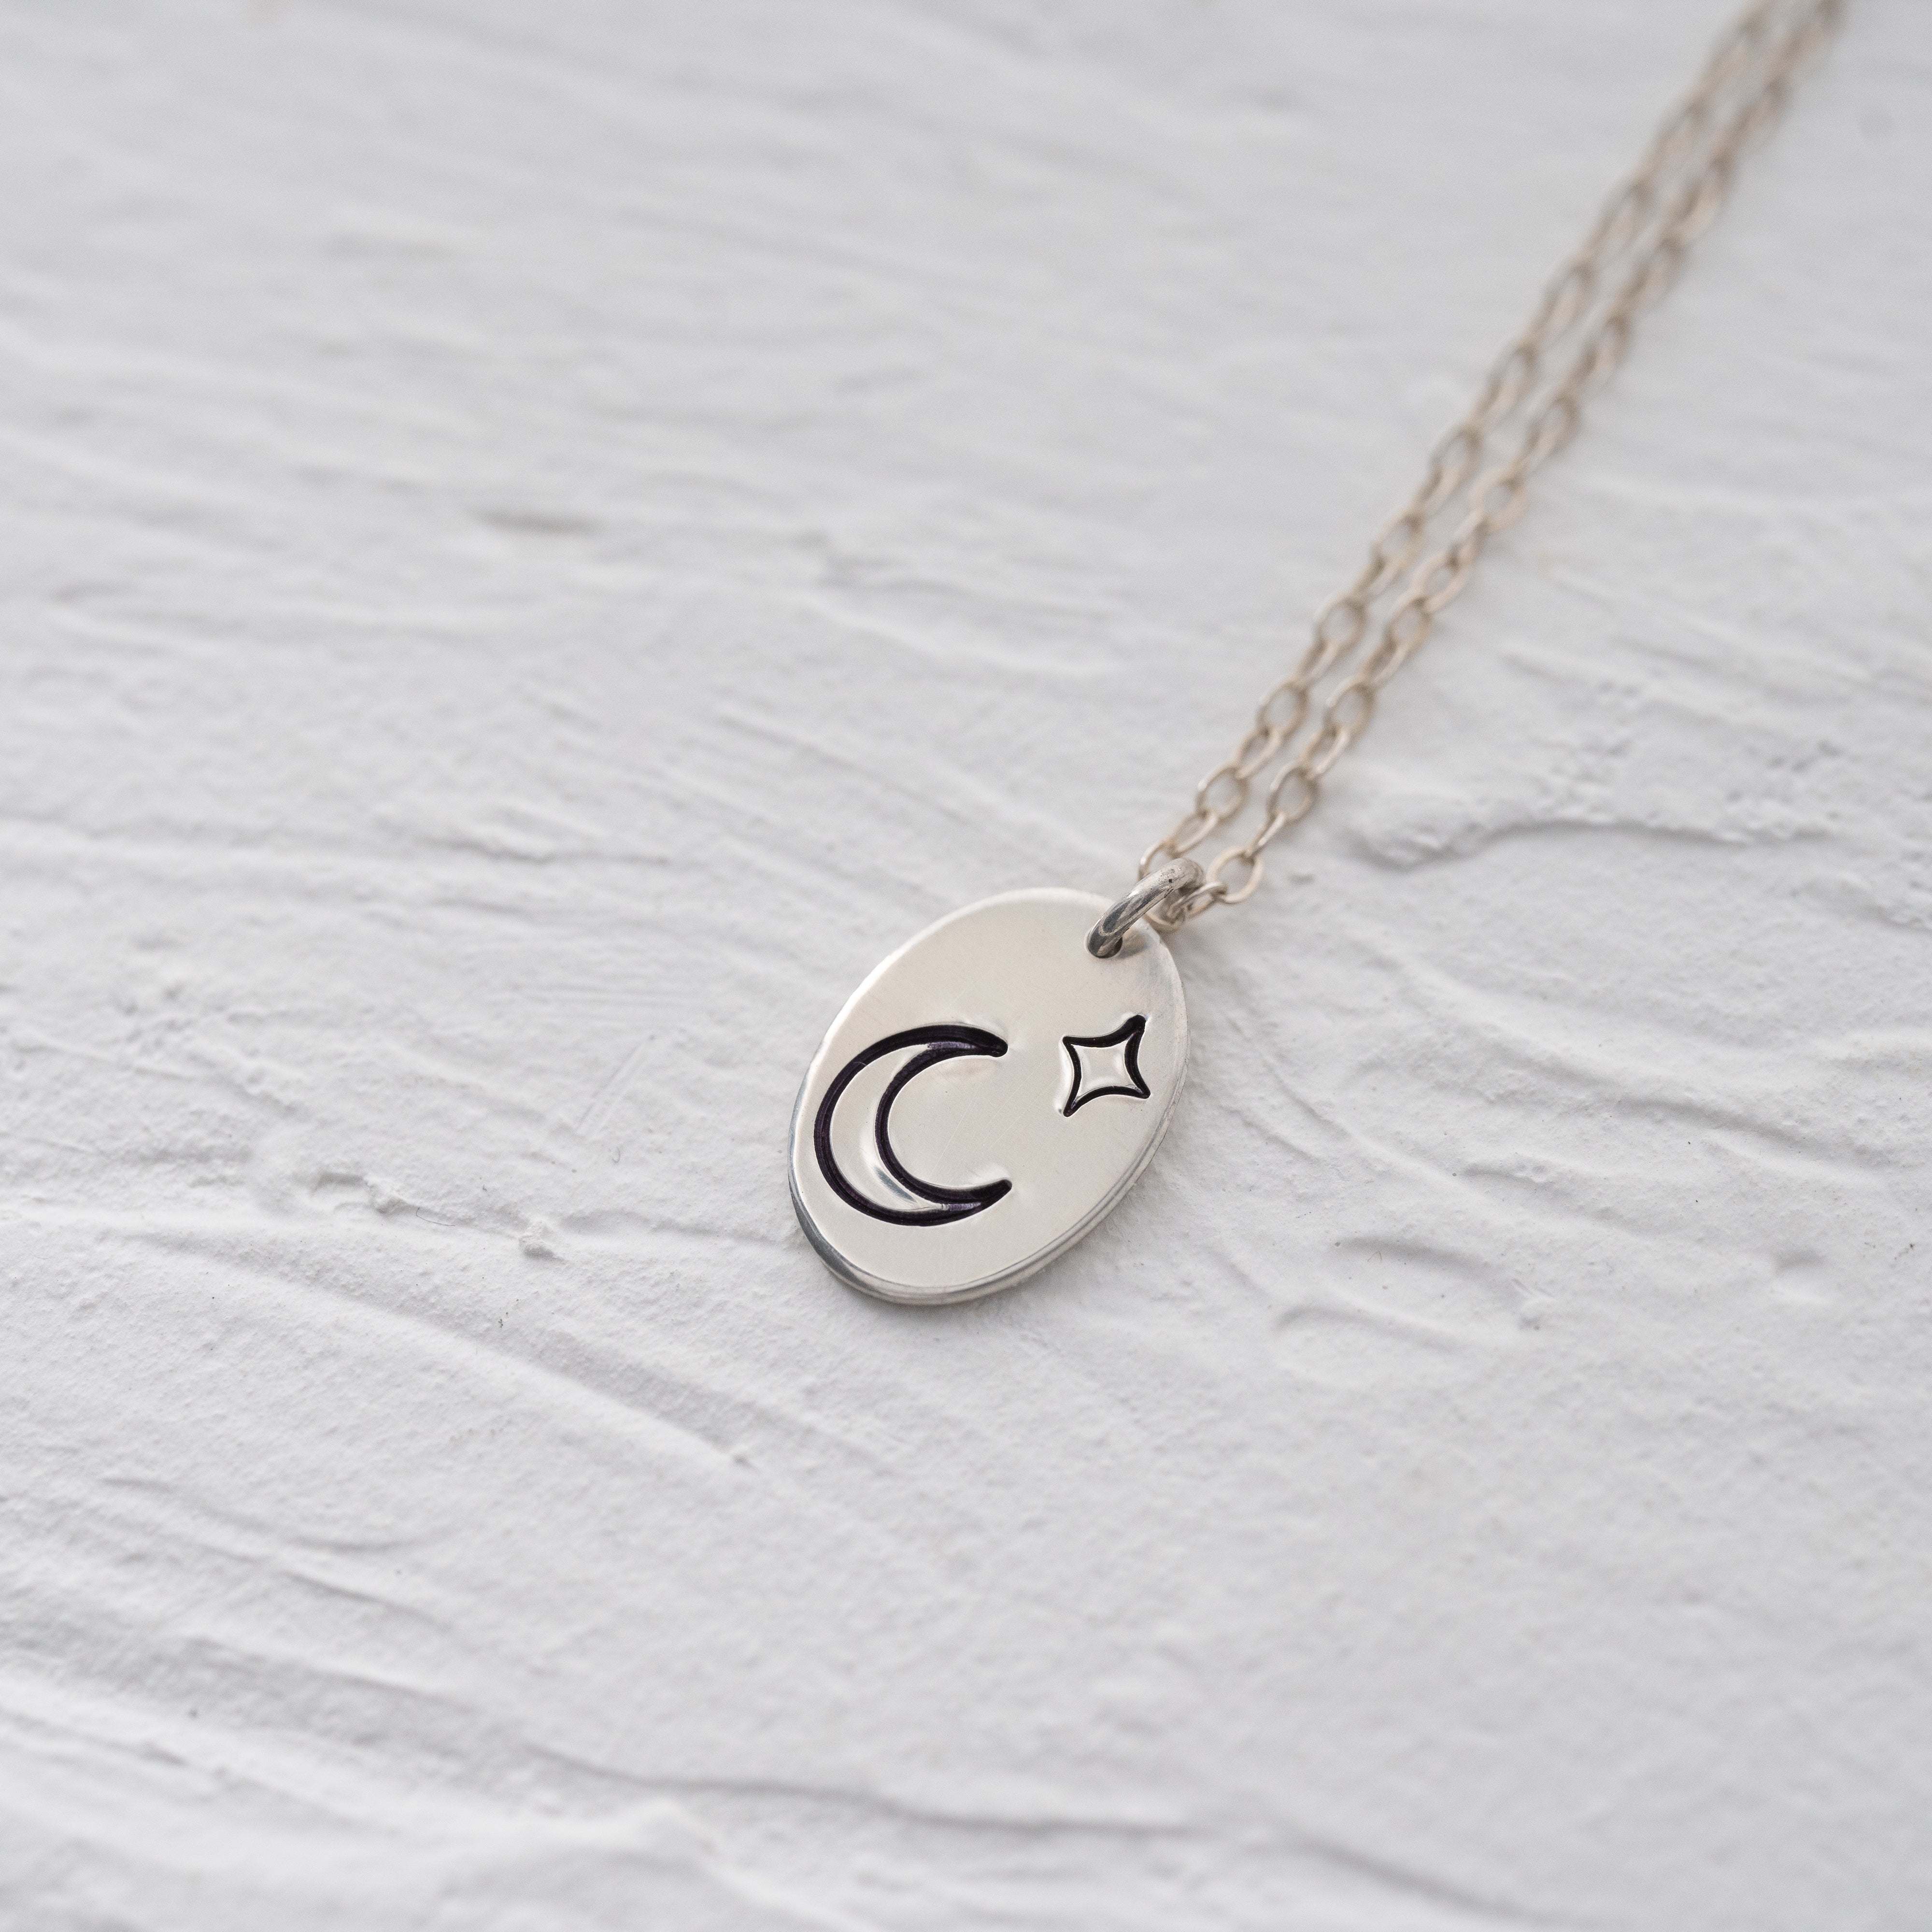 Silver oval shaped pendant with a moon and a star above